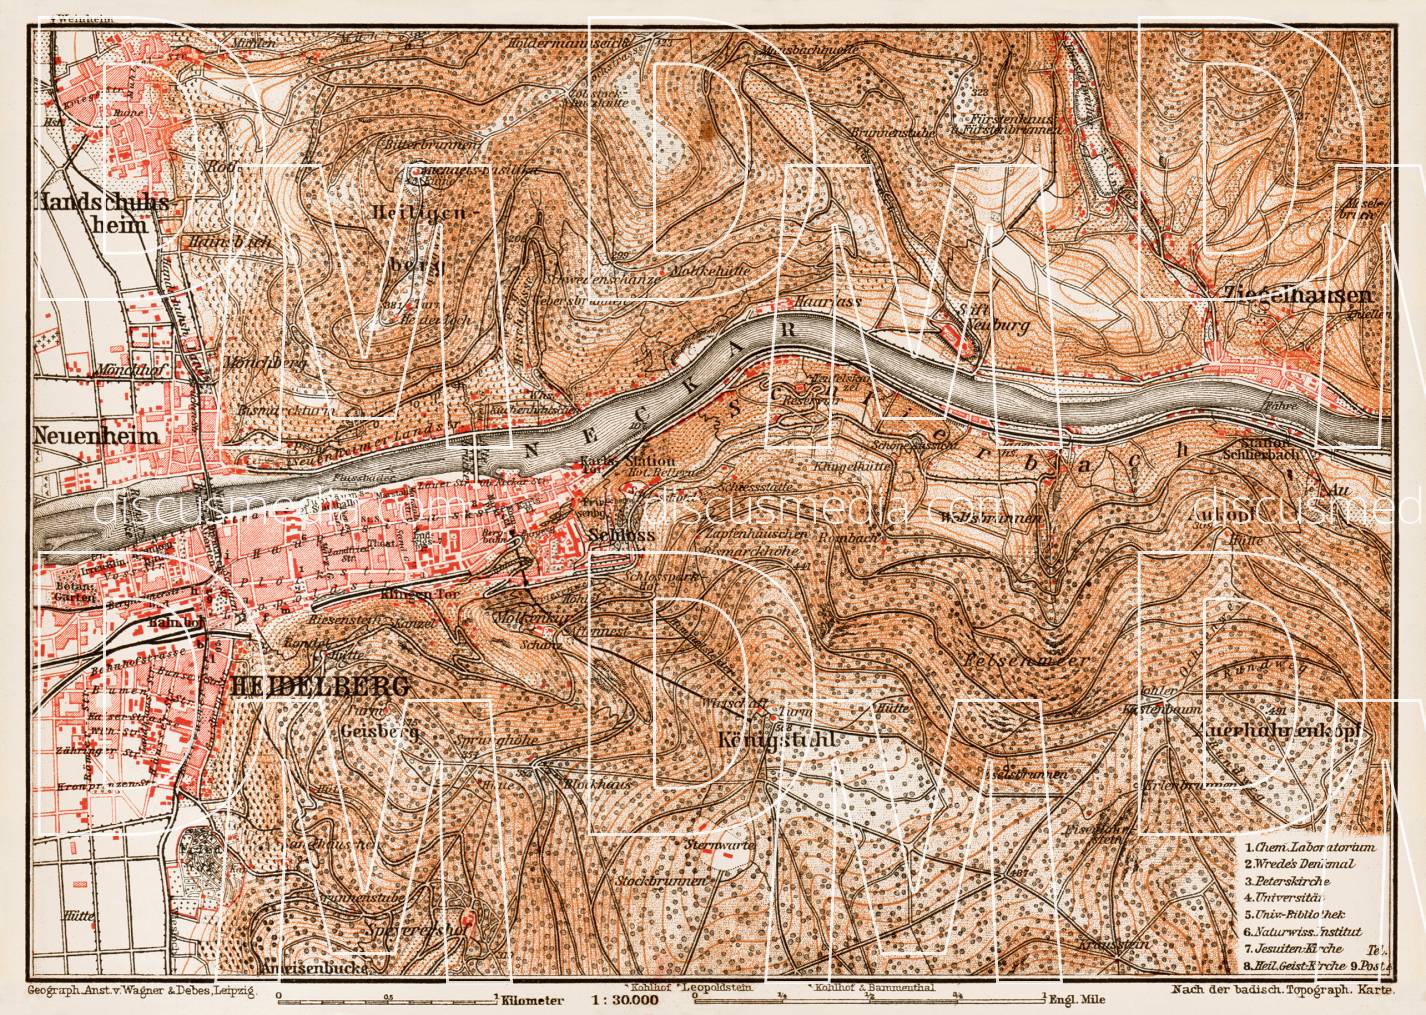 Old map of Heidelberg and nearer vicinity in 1909. Buy vintage map